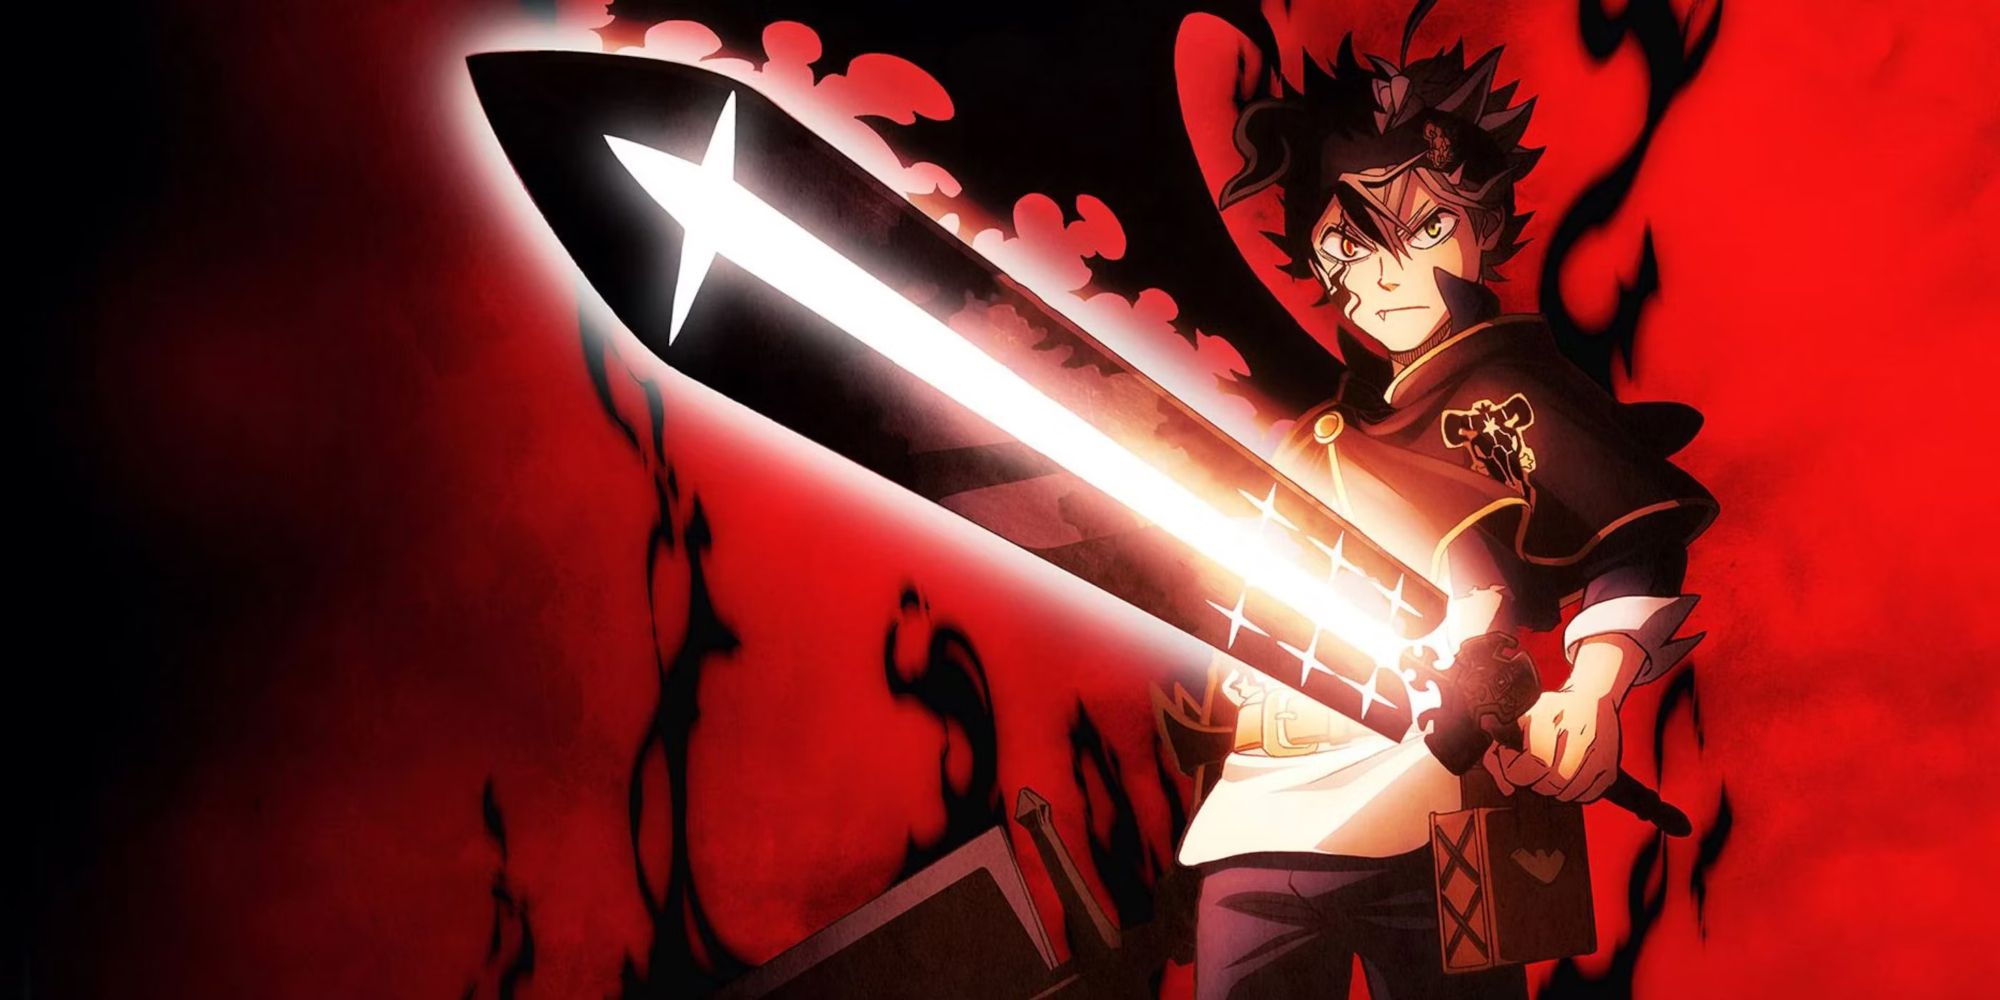 Image shows Black Clover's Asta holding two large swords oozing with black and white magic while black devil energy forms around him with a red background.